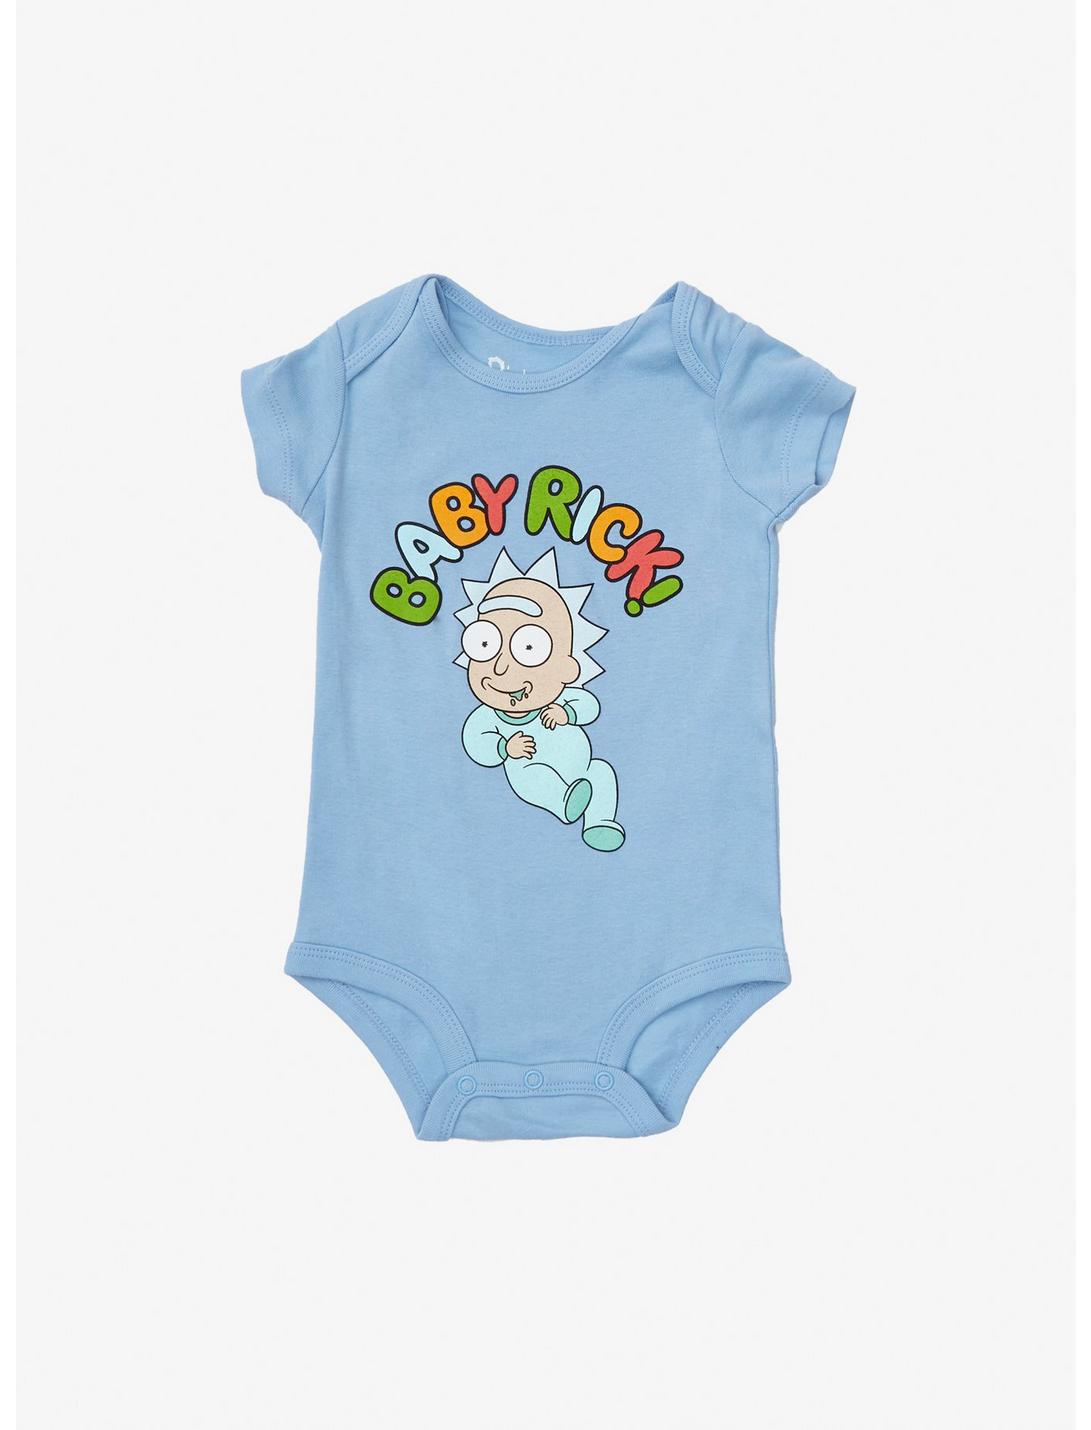 Rick and Morty Baby Rick Infant Bodysuit - BoxLunch Exclusive, BLUE, hi-res